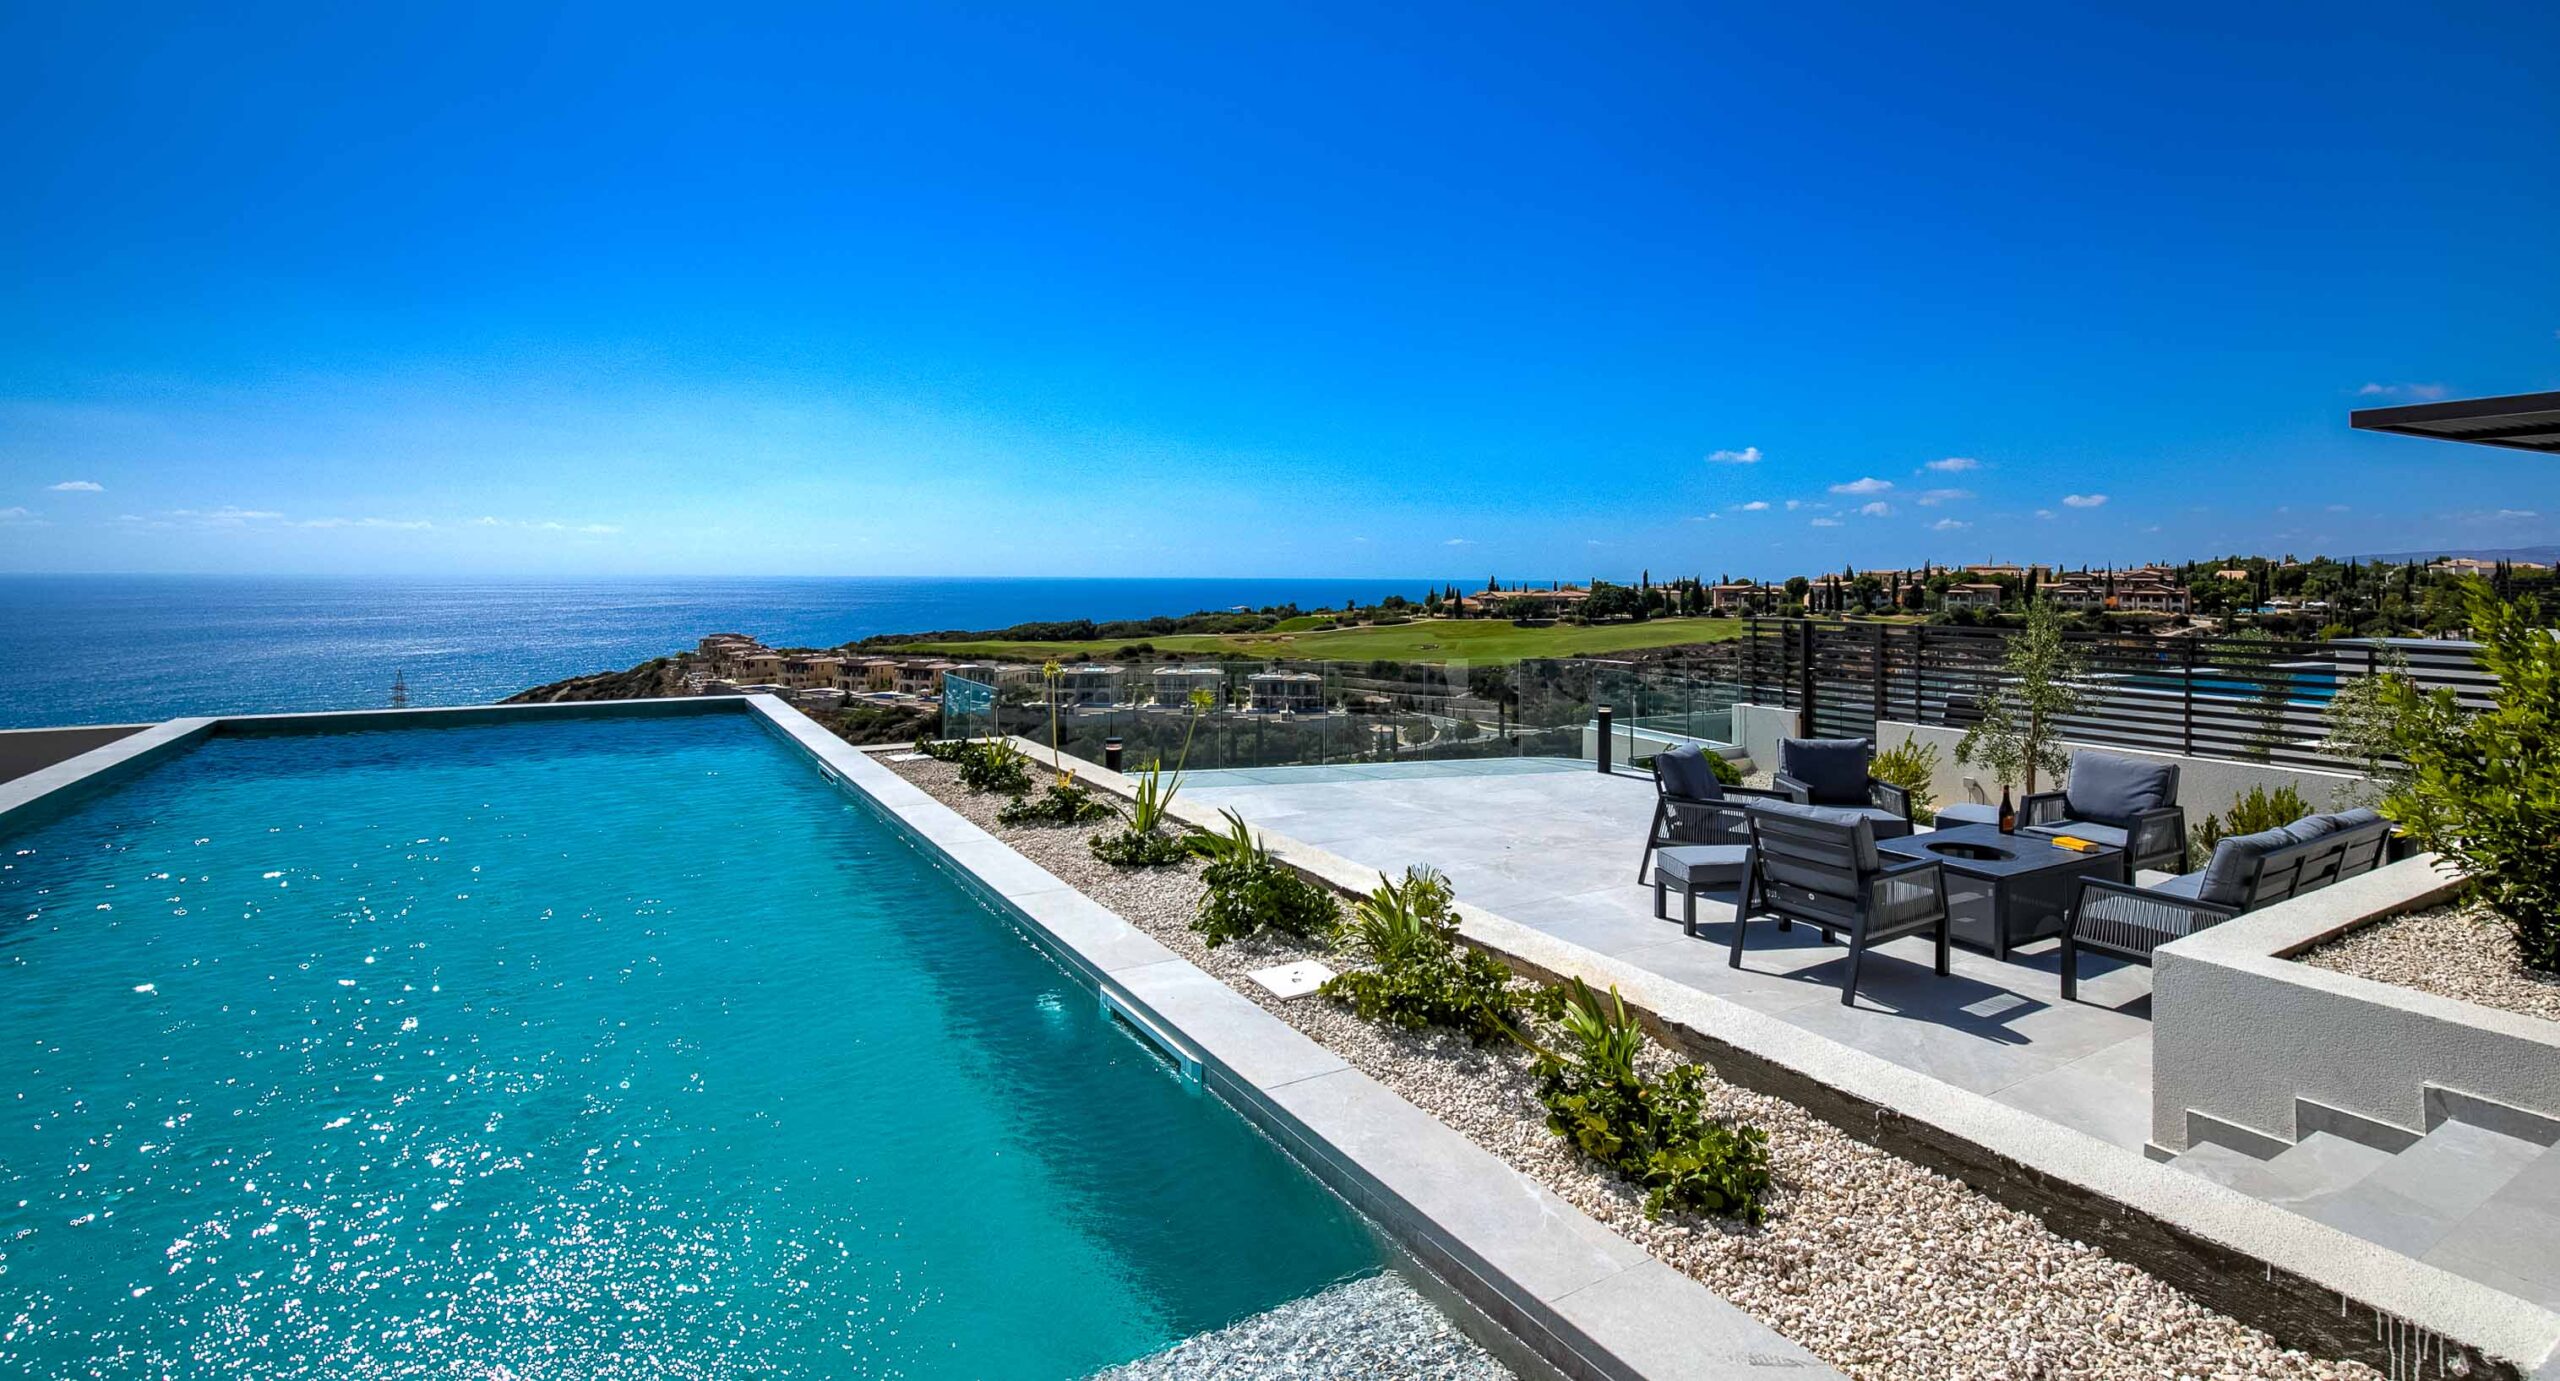 Photo of Villa 286 on Aphrodite Hills - showing the pool leading out to sea views, with seating area